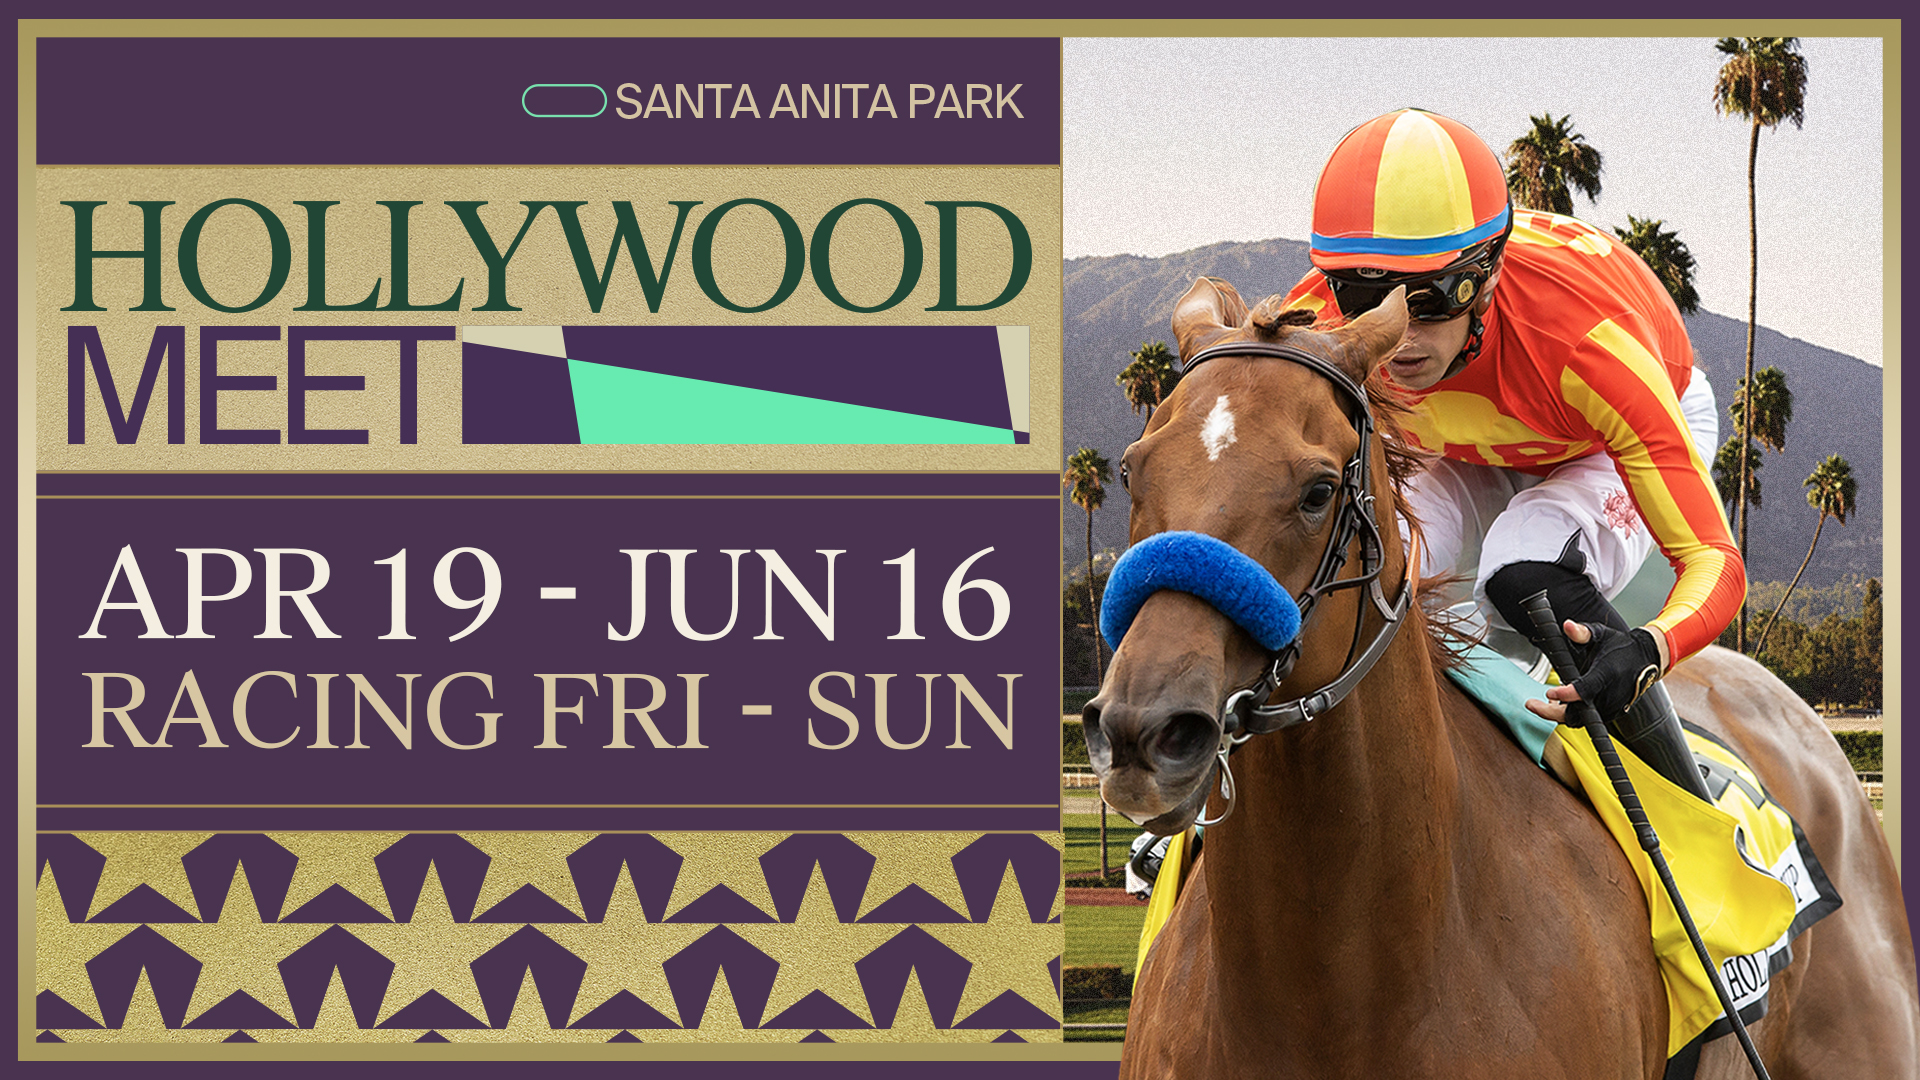 The Hollywood Meet is here! We will have live racing Fri - Sun through June 16th!